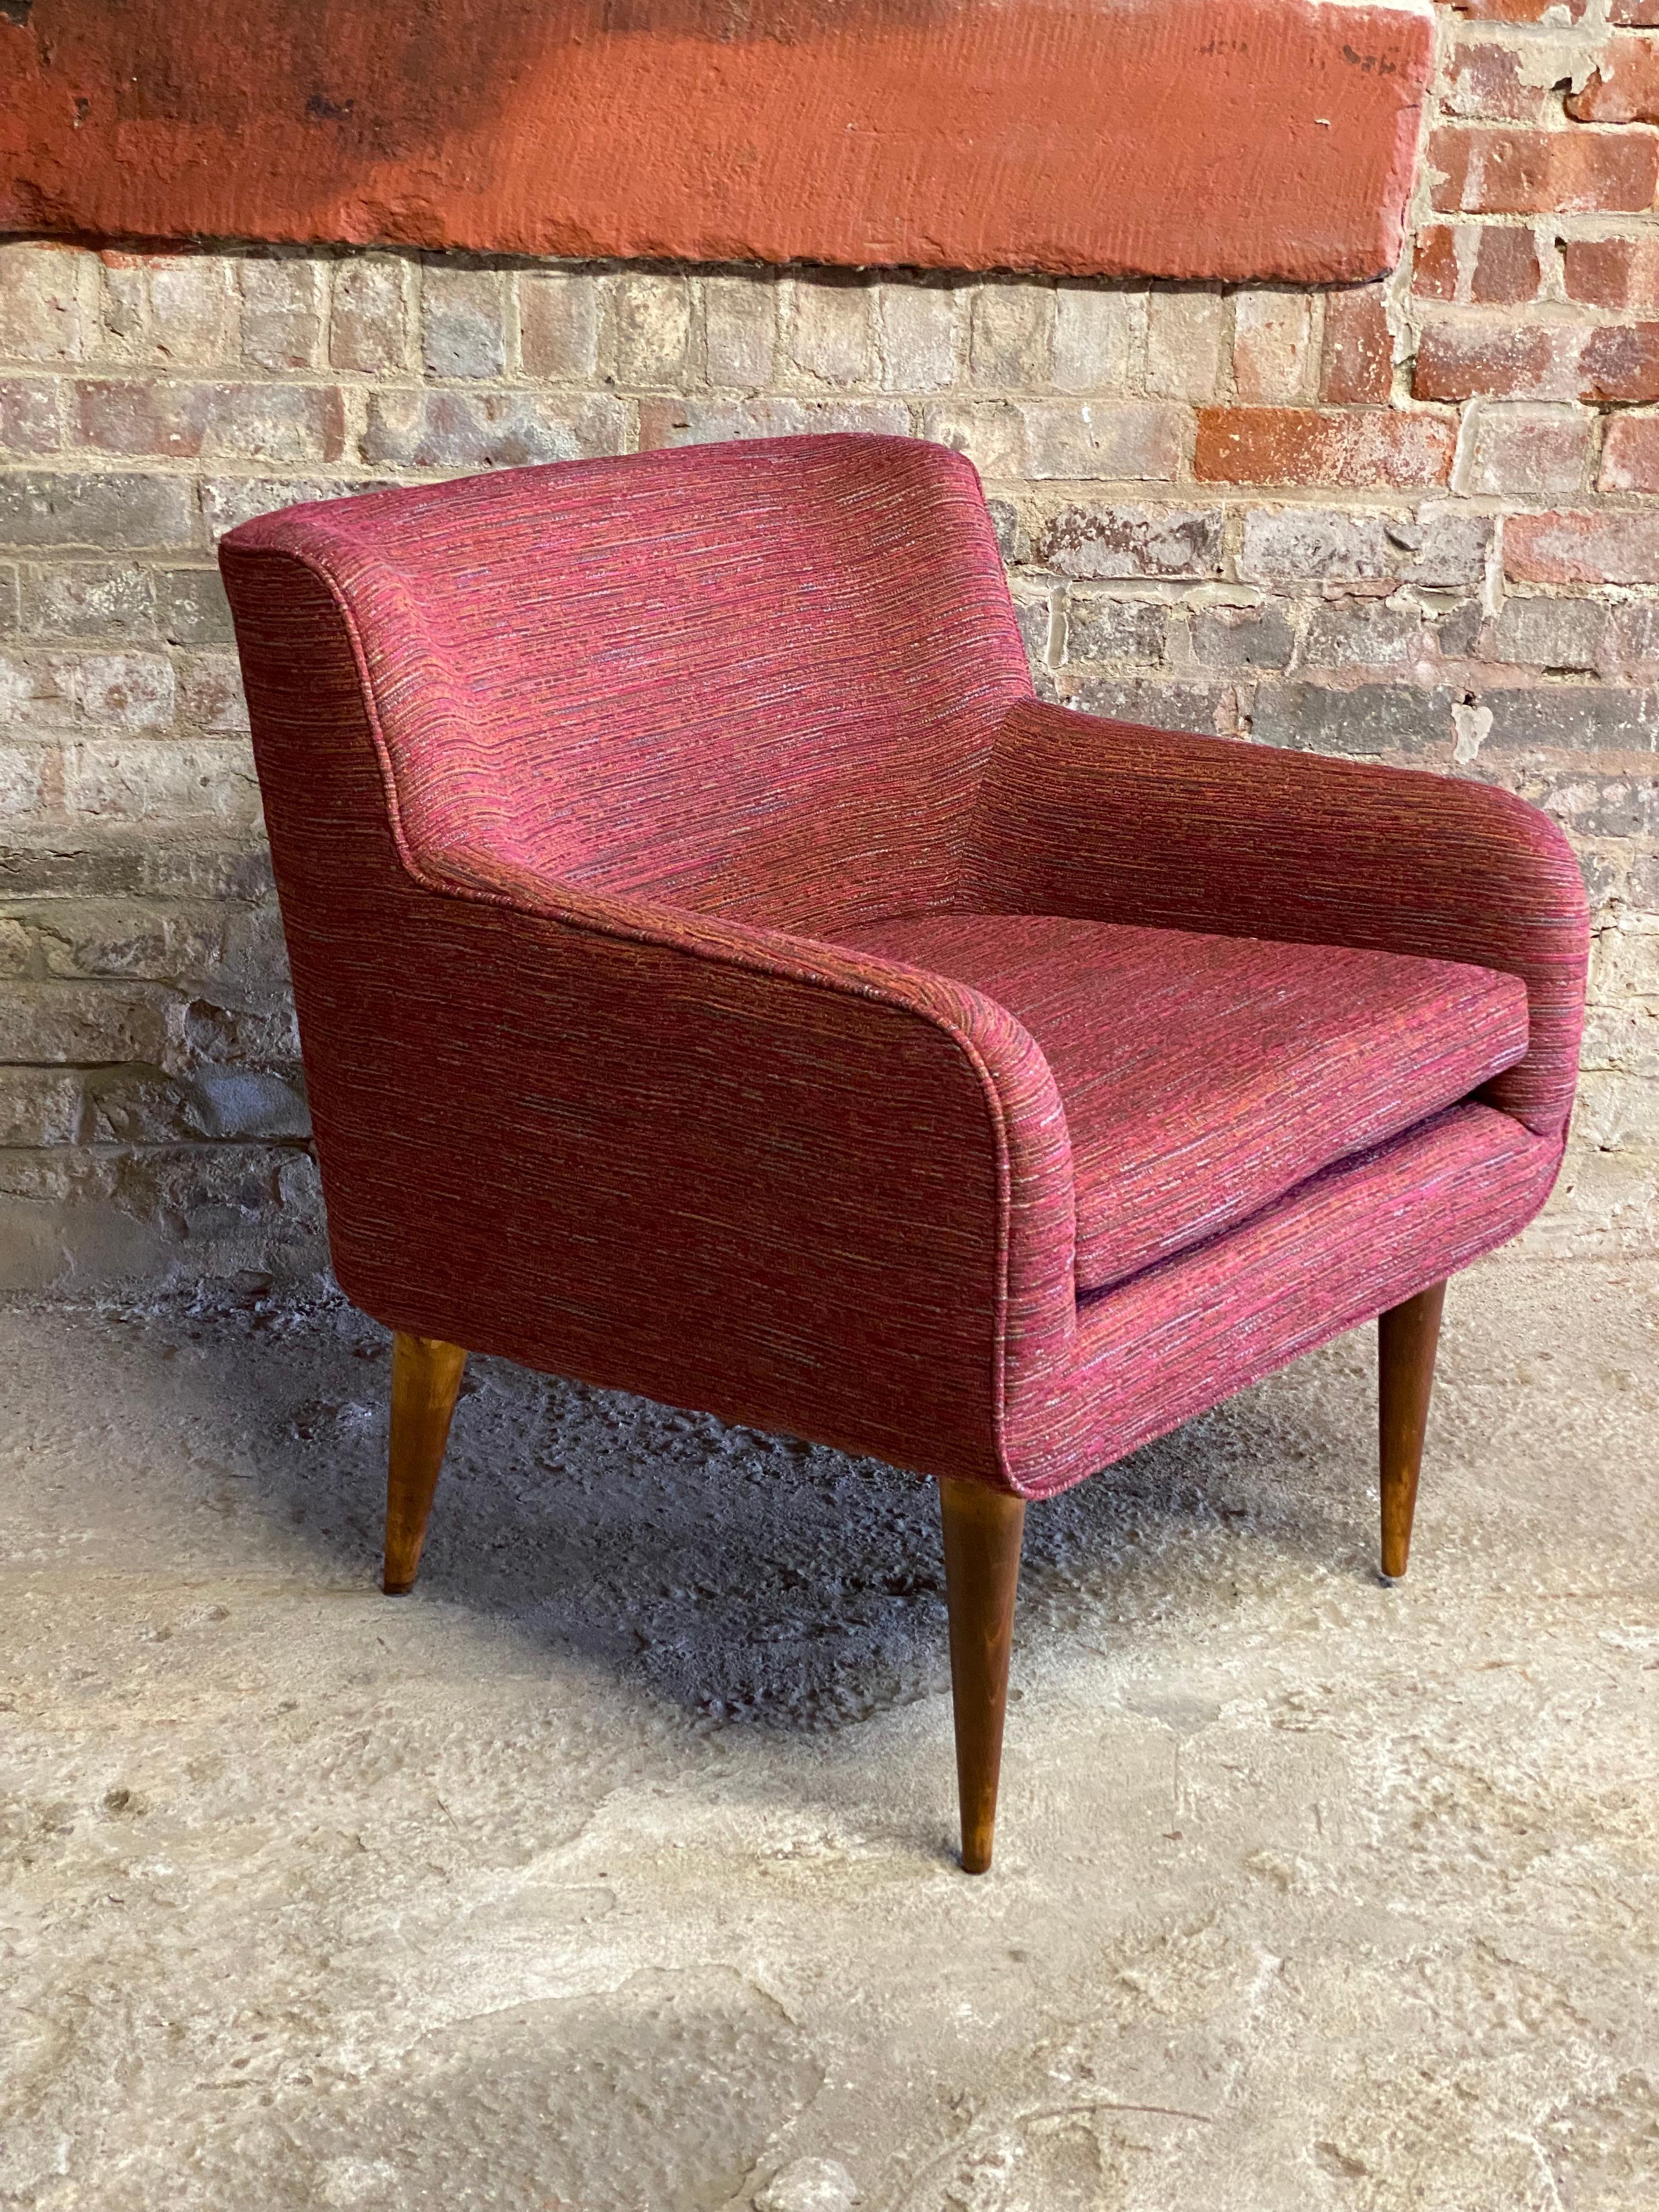 A comfortable compact sexy little accent chair. Great in any spot in the home or office. Freshly upholstered with new cushioning. Upholstered in a sweet durable, period style fabric. Raspberry, gray and gold! Elegant tapered legs and a curved and